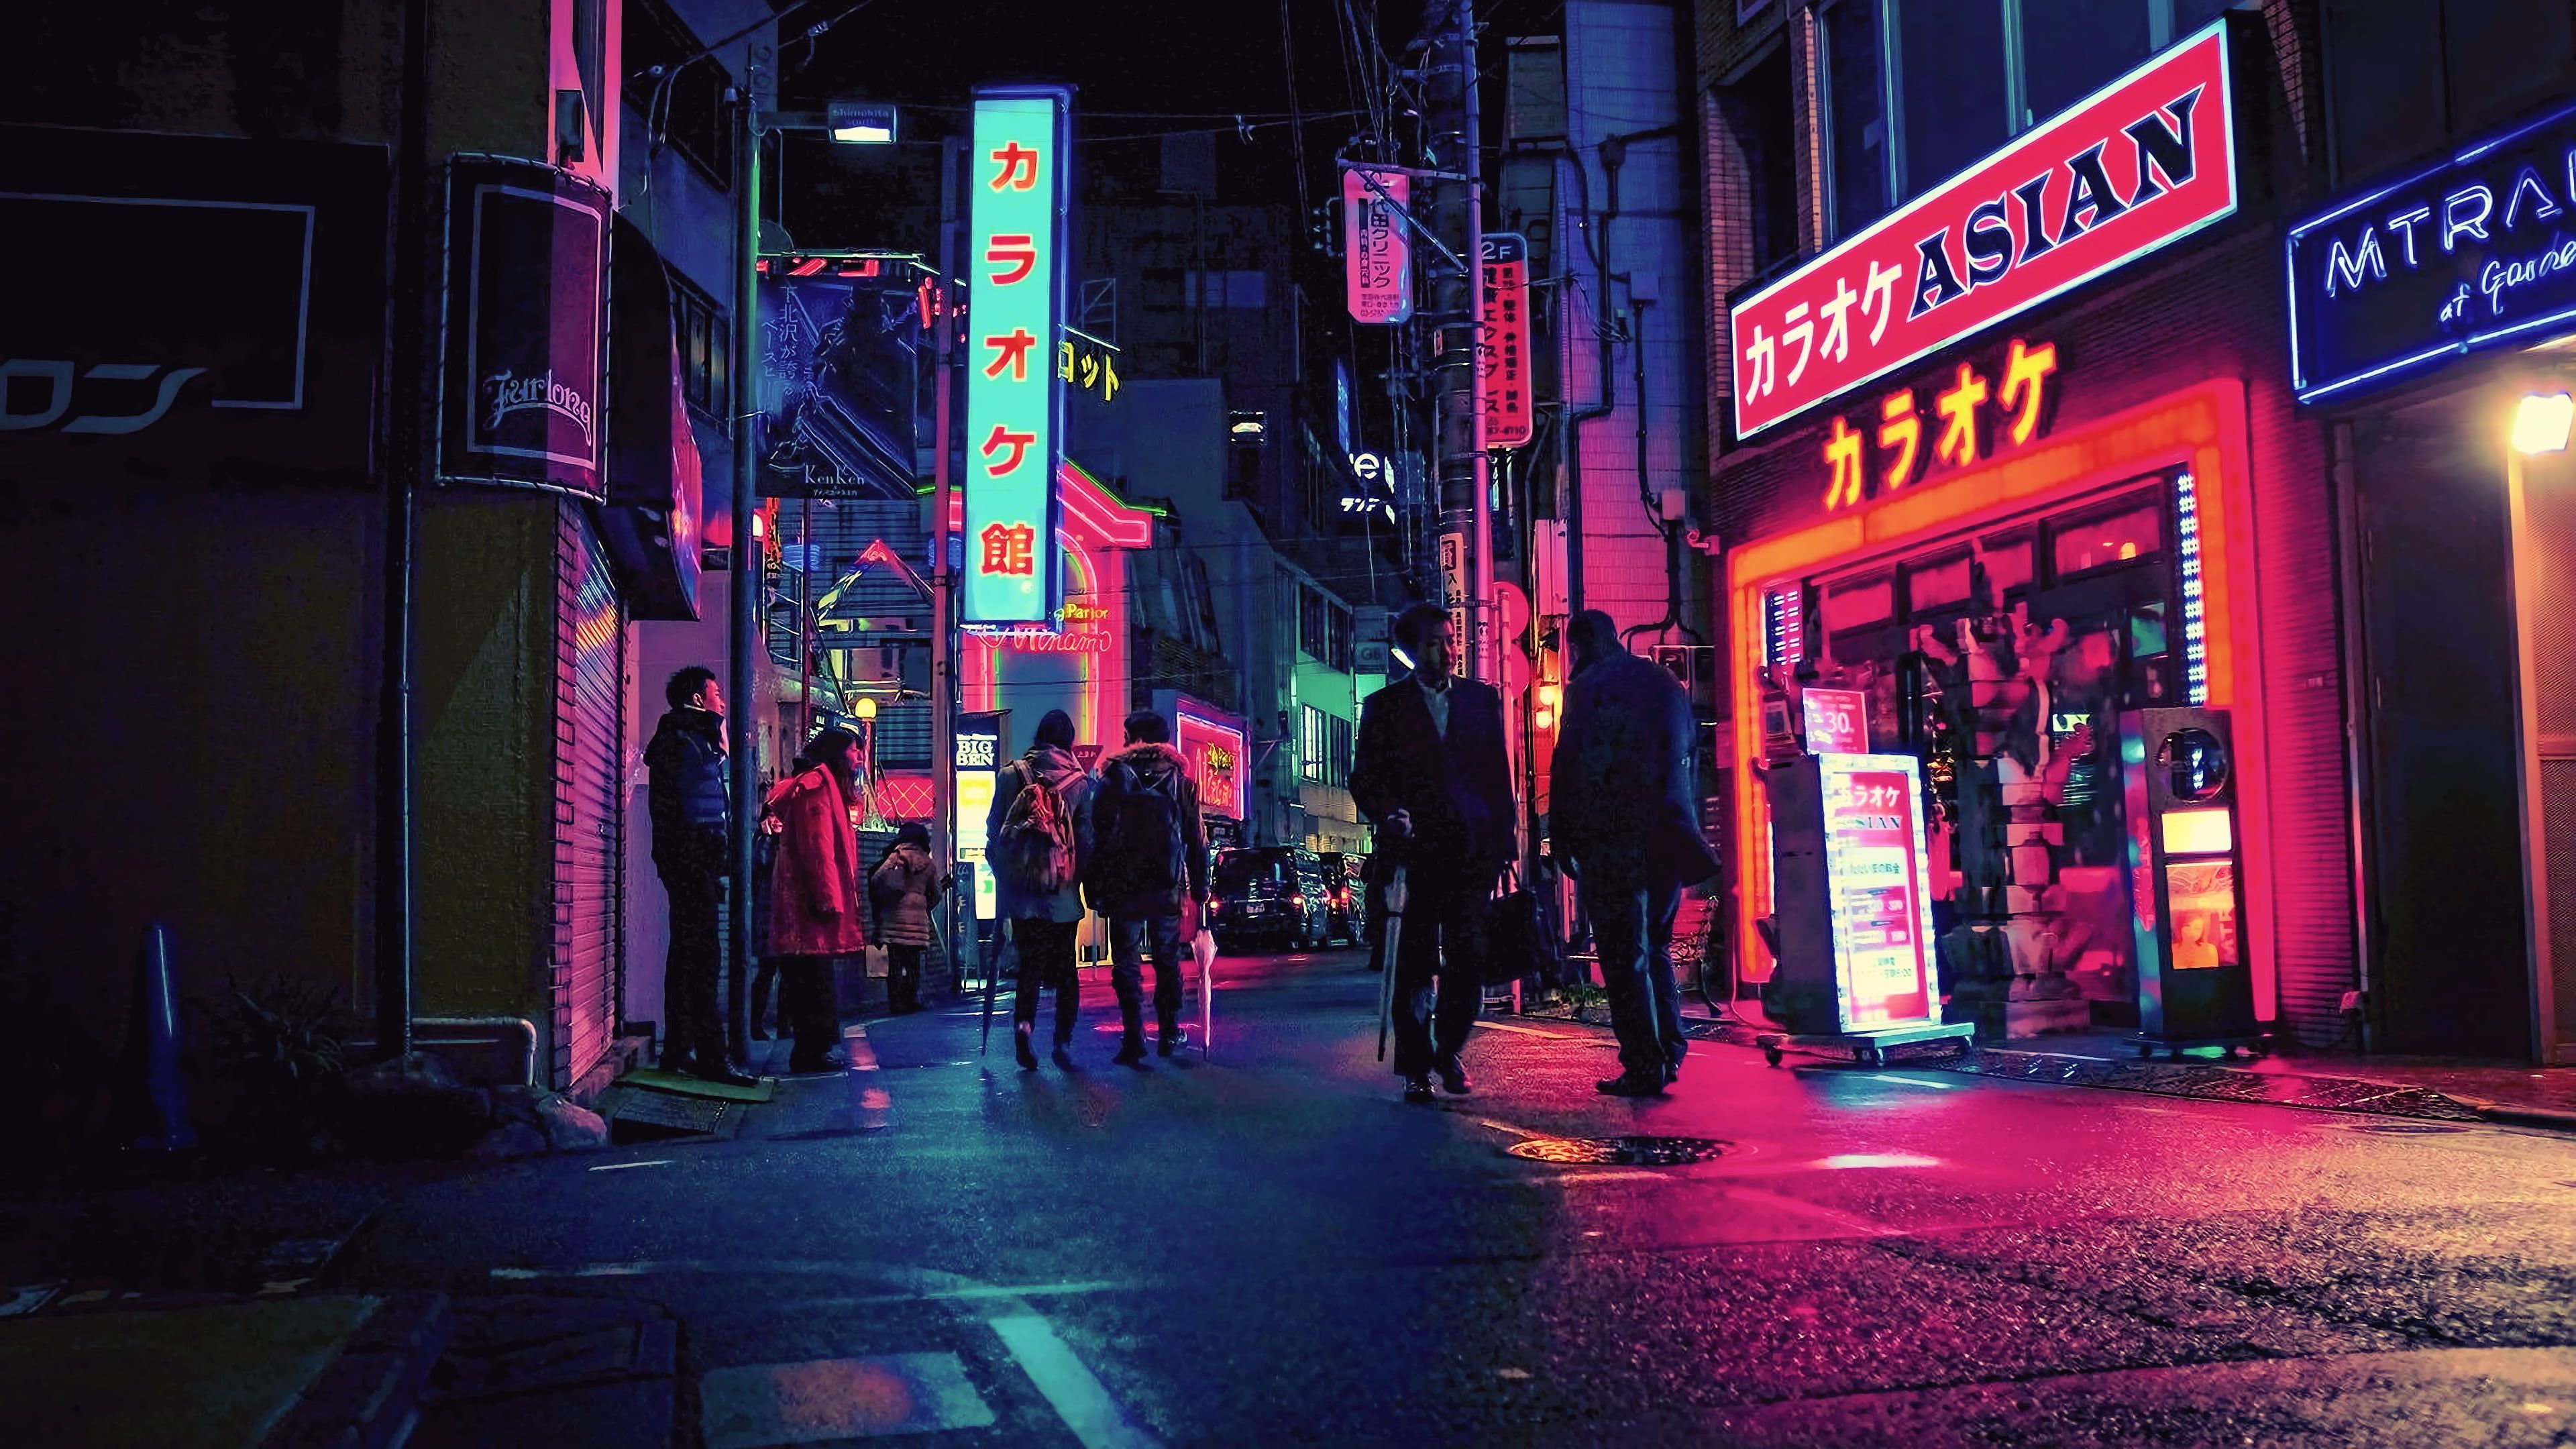 Neon Street Anime Wallpapers - Wallpaper Cave